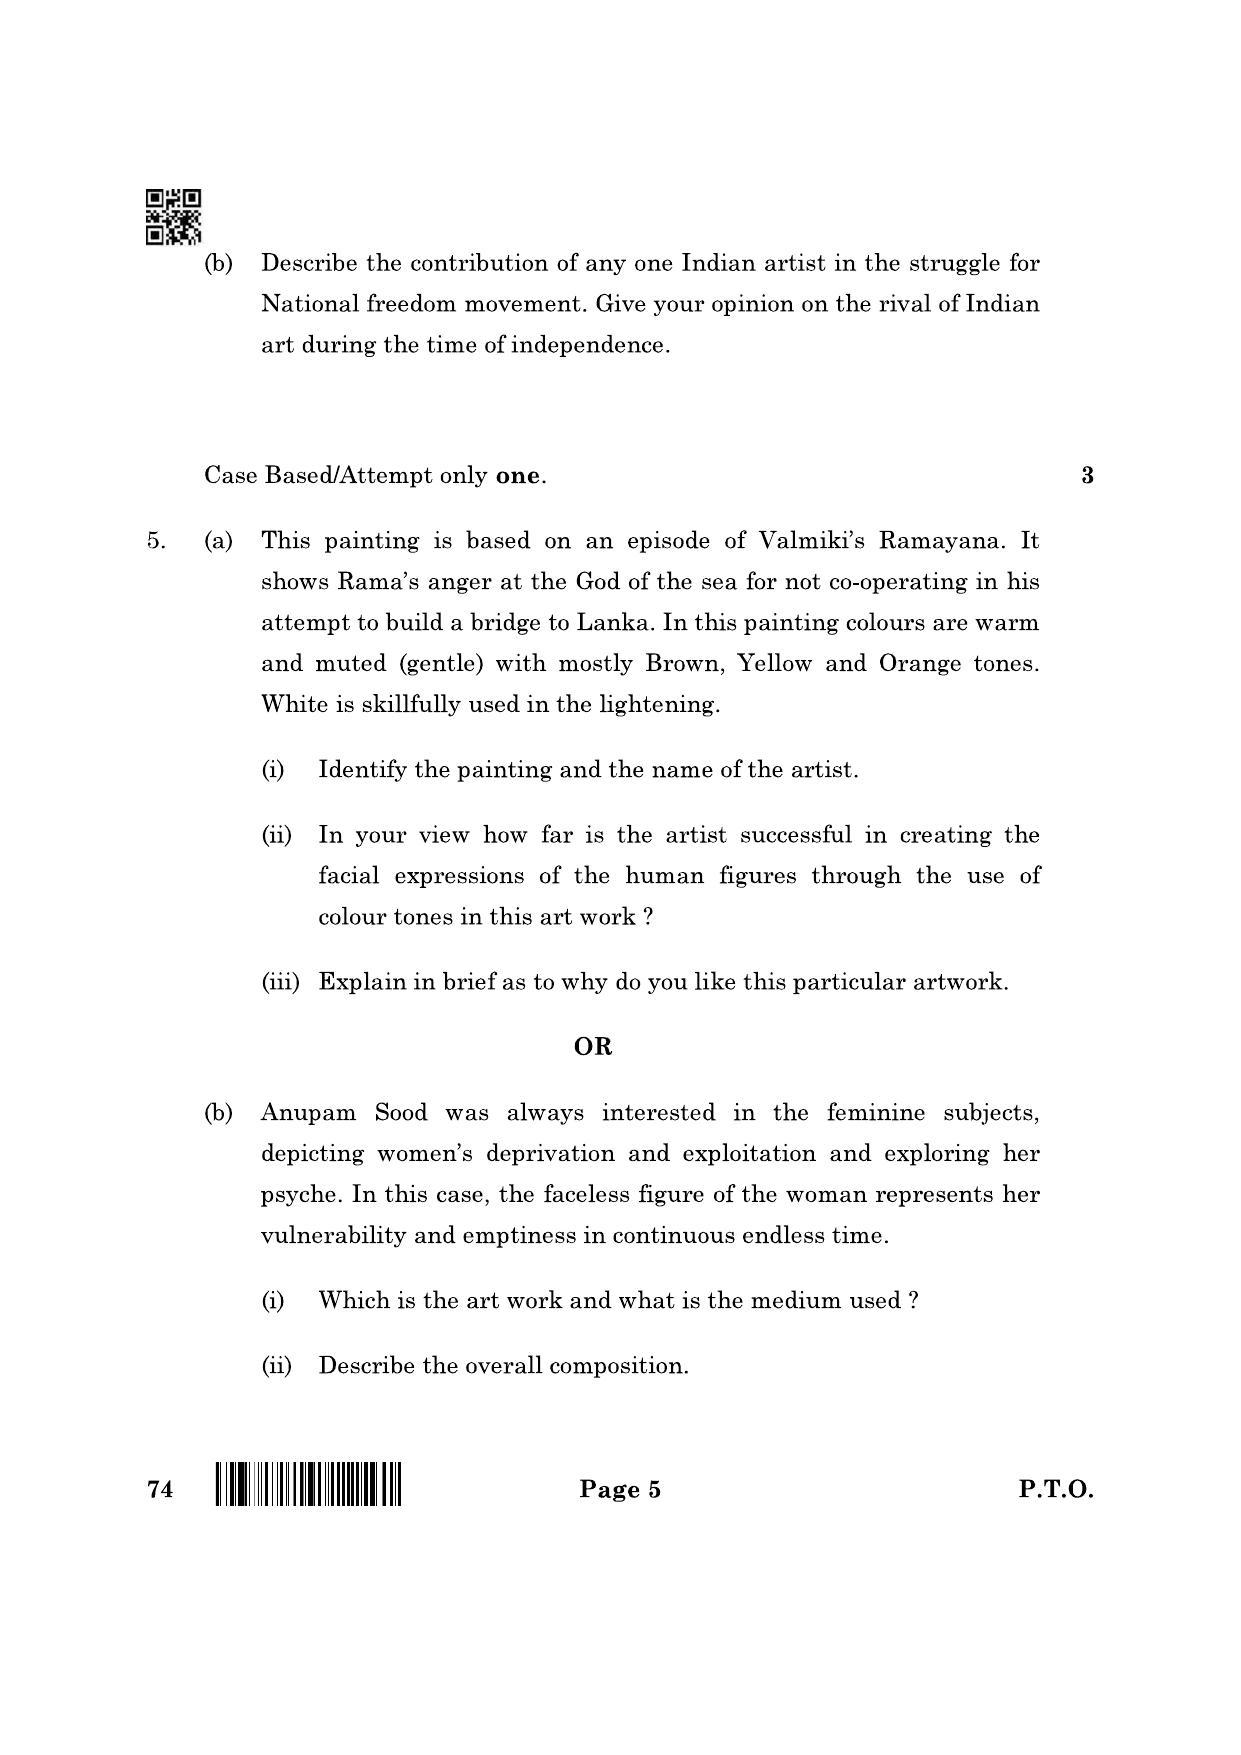 CBSE Class 12 74_Graphics 2022 Question Paper - Page 5